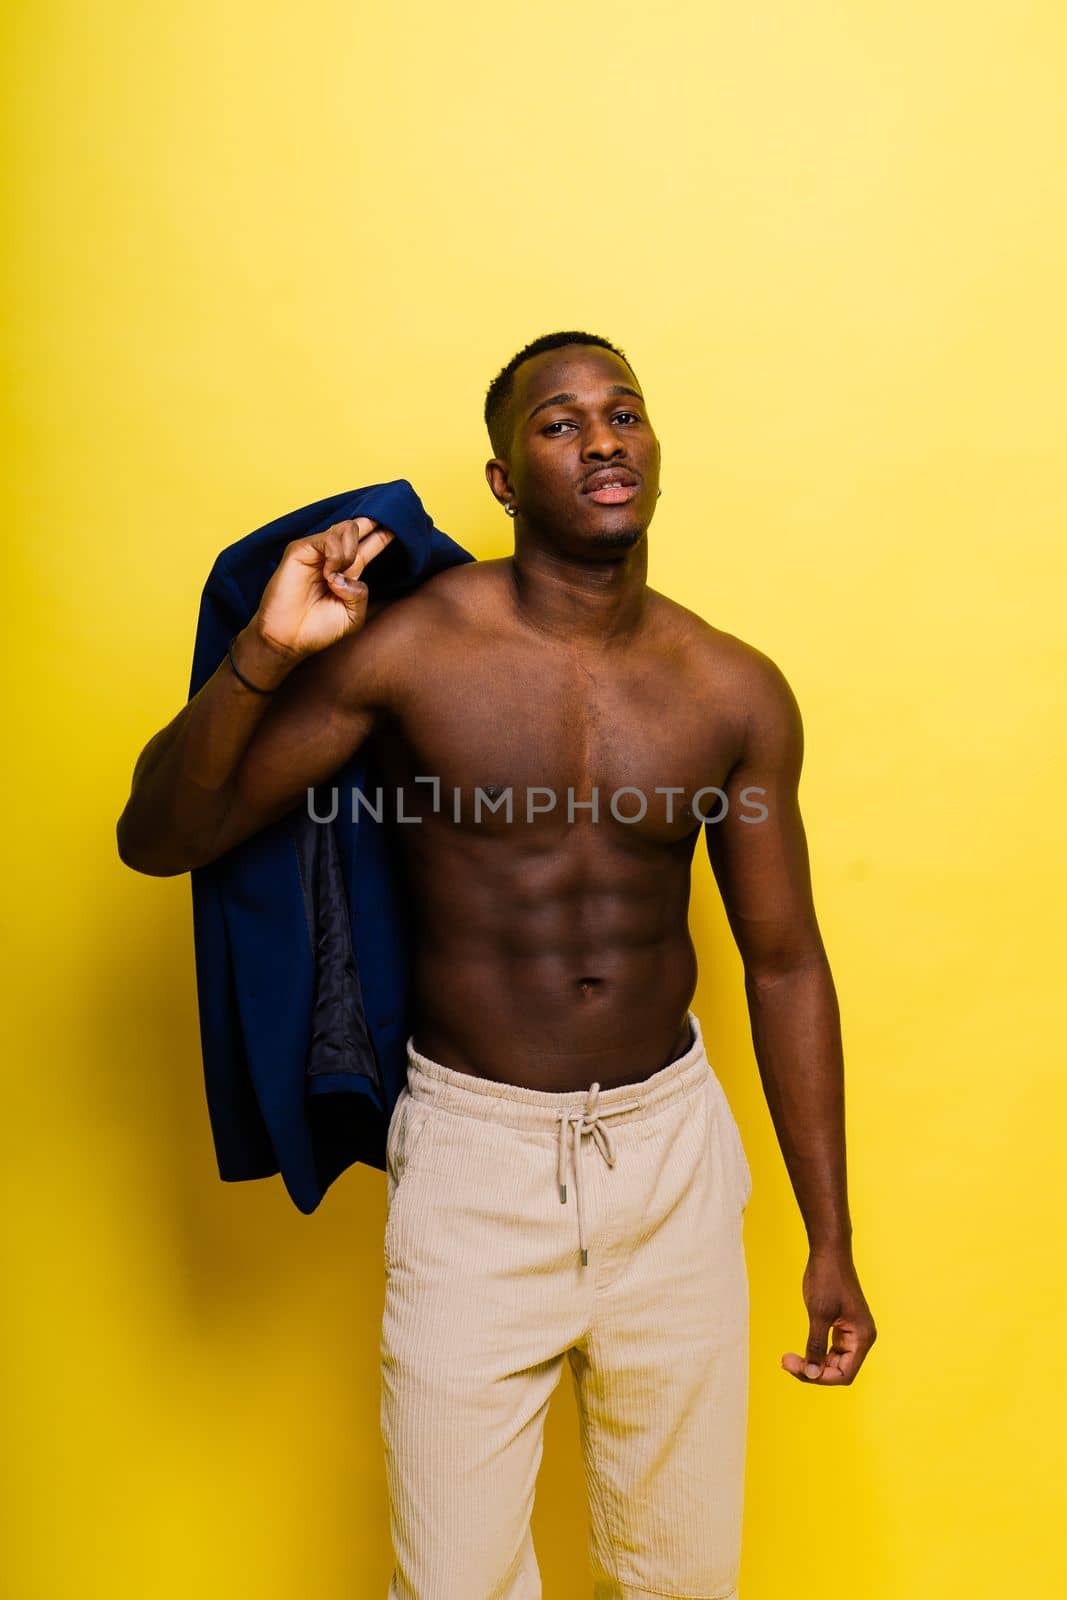 Smiling young african american man guy isolated on yellow background studio. People sincere emotion